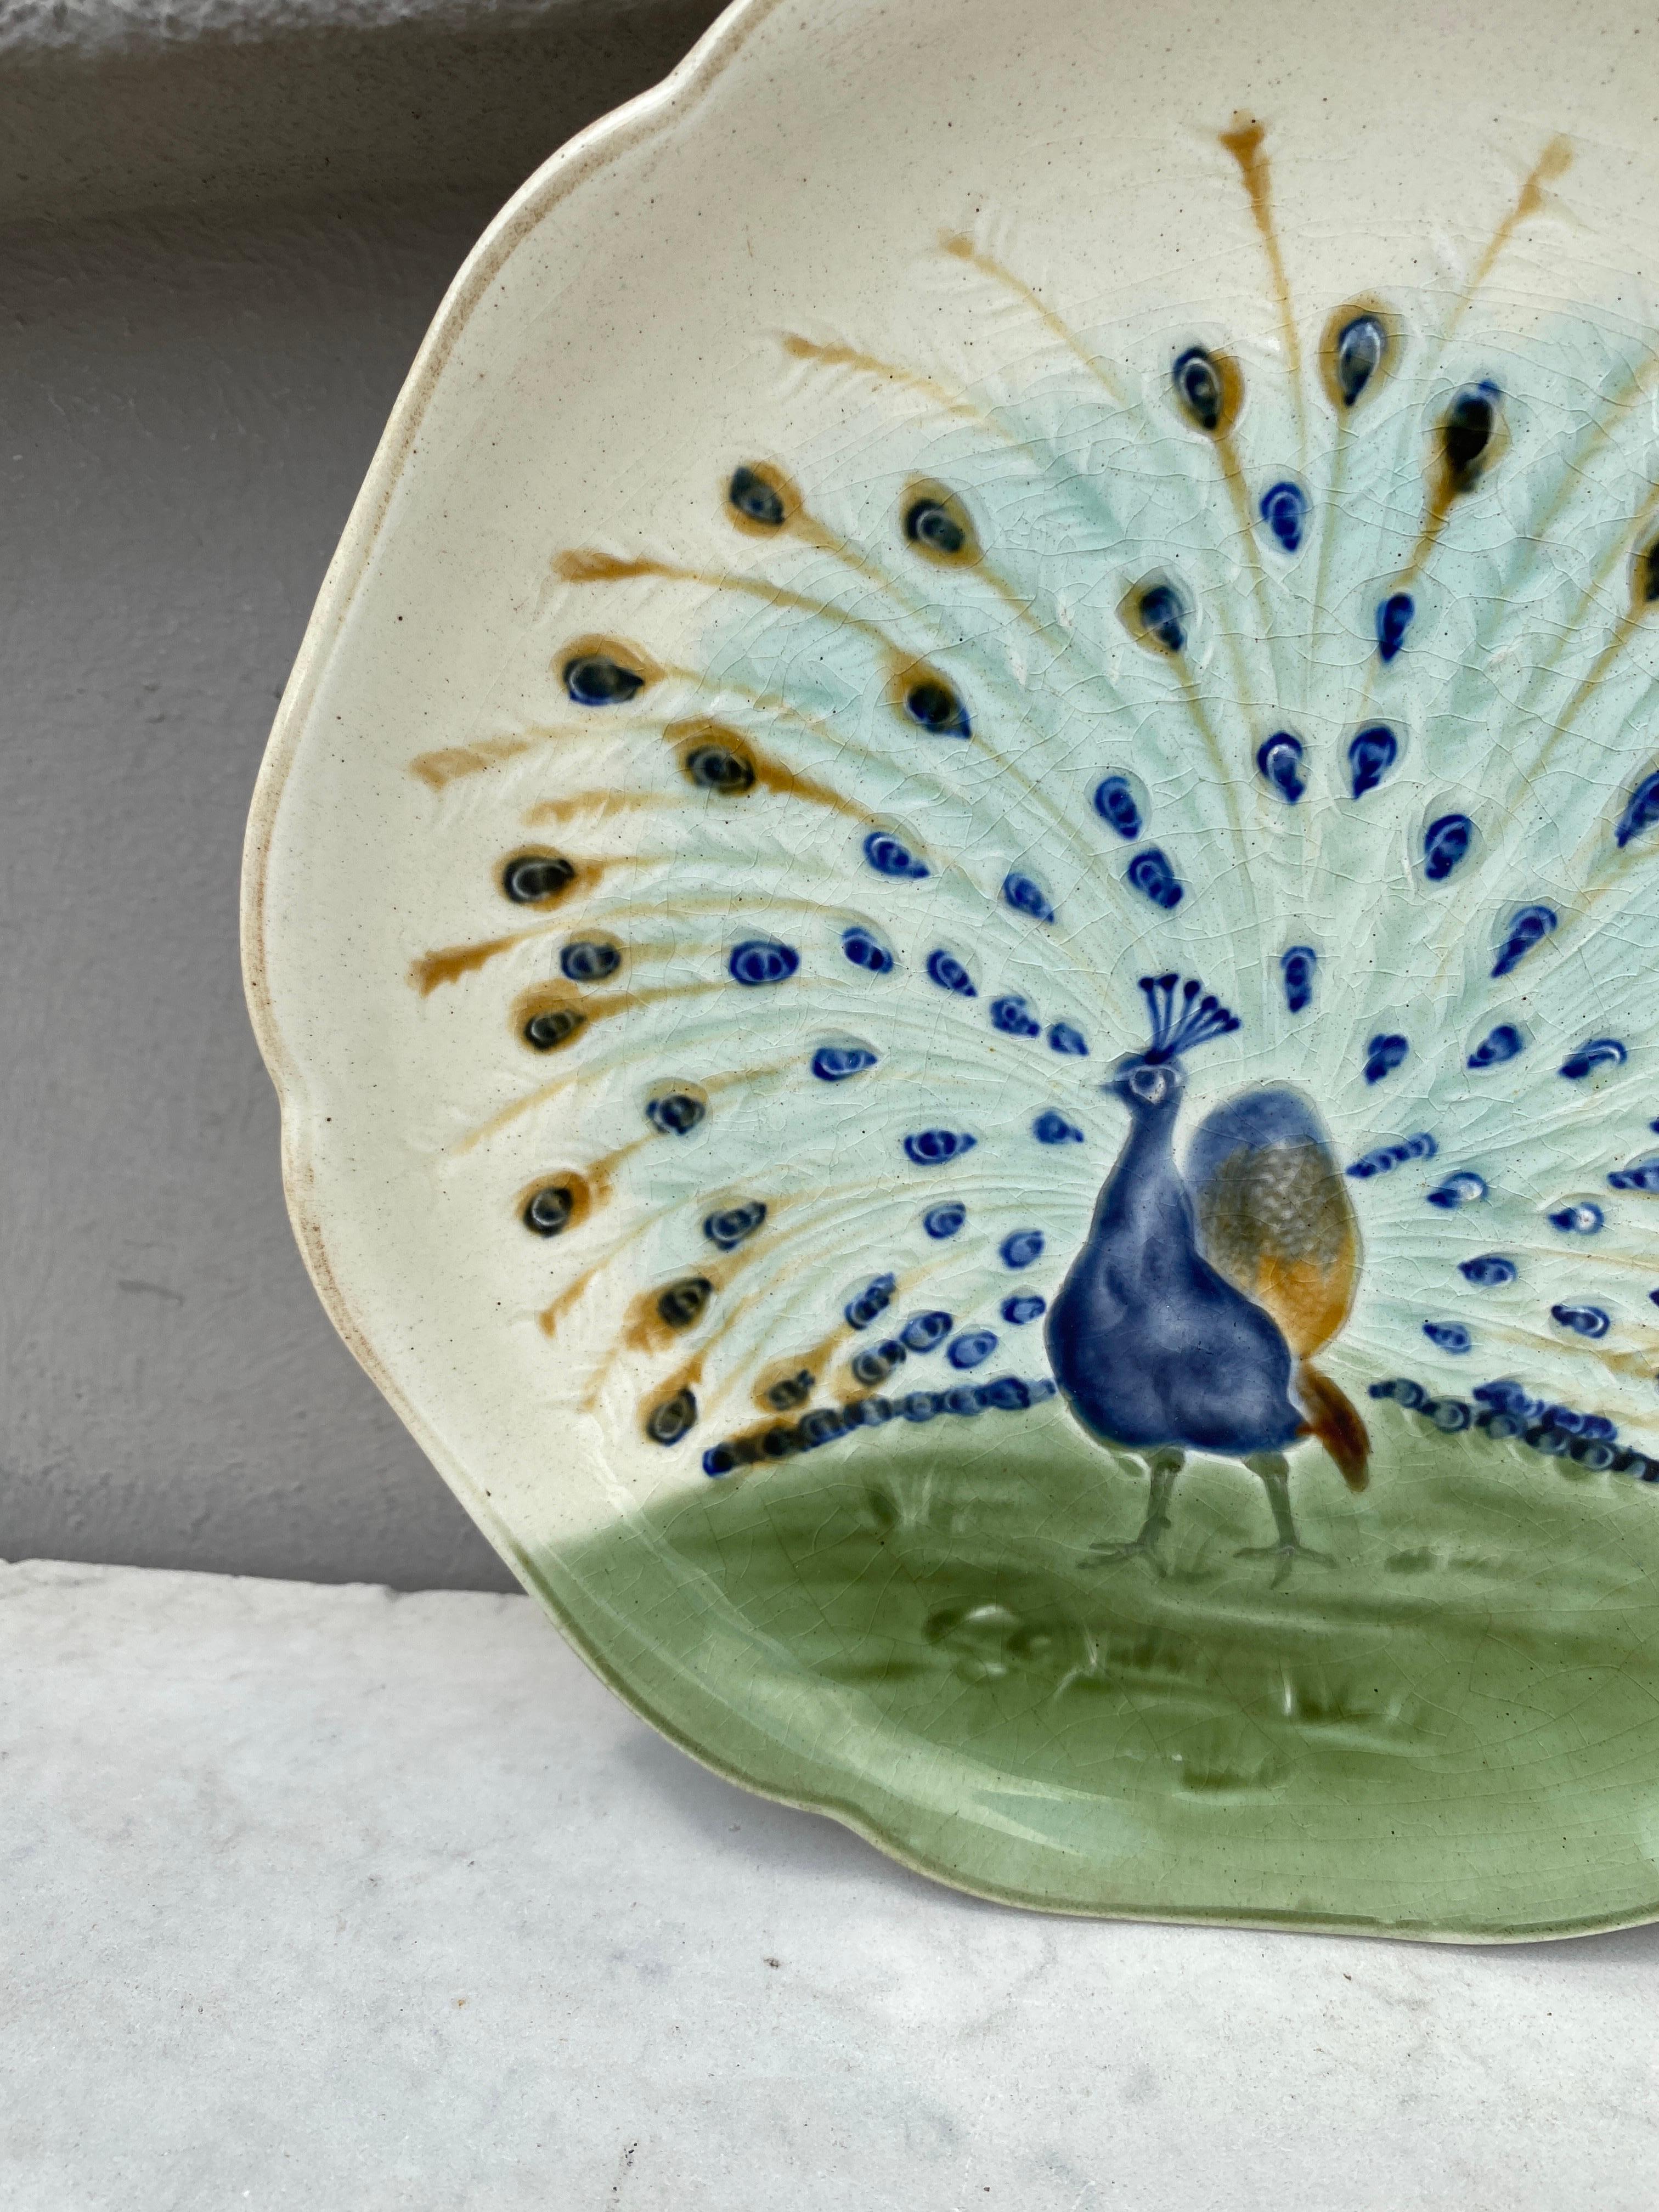 Majolica plate with a peacock signed Hippolyte Boulenger Choisy le Roi, circa 1890.
The manufacture of Choisy le Roi was one of the most important manufacture at the end of 19th century, they produced very high quality ceramics of all kinds as